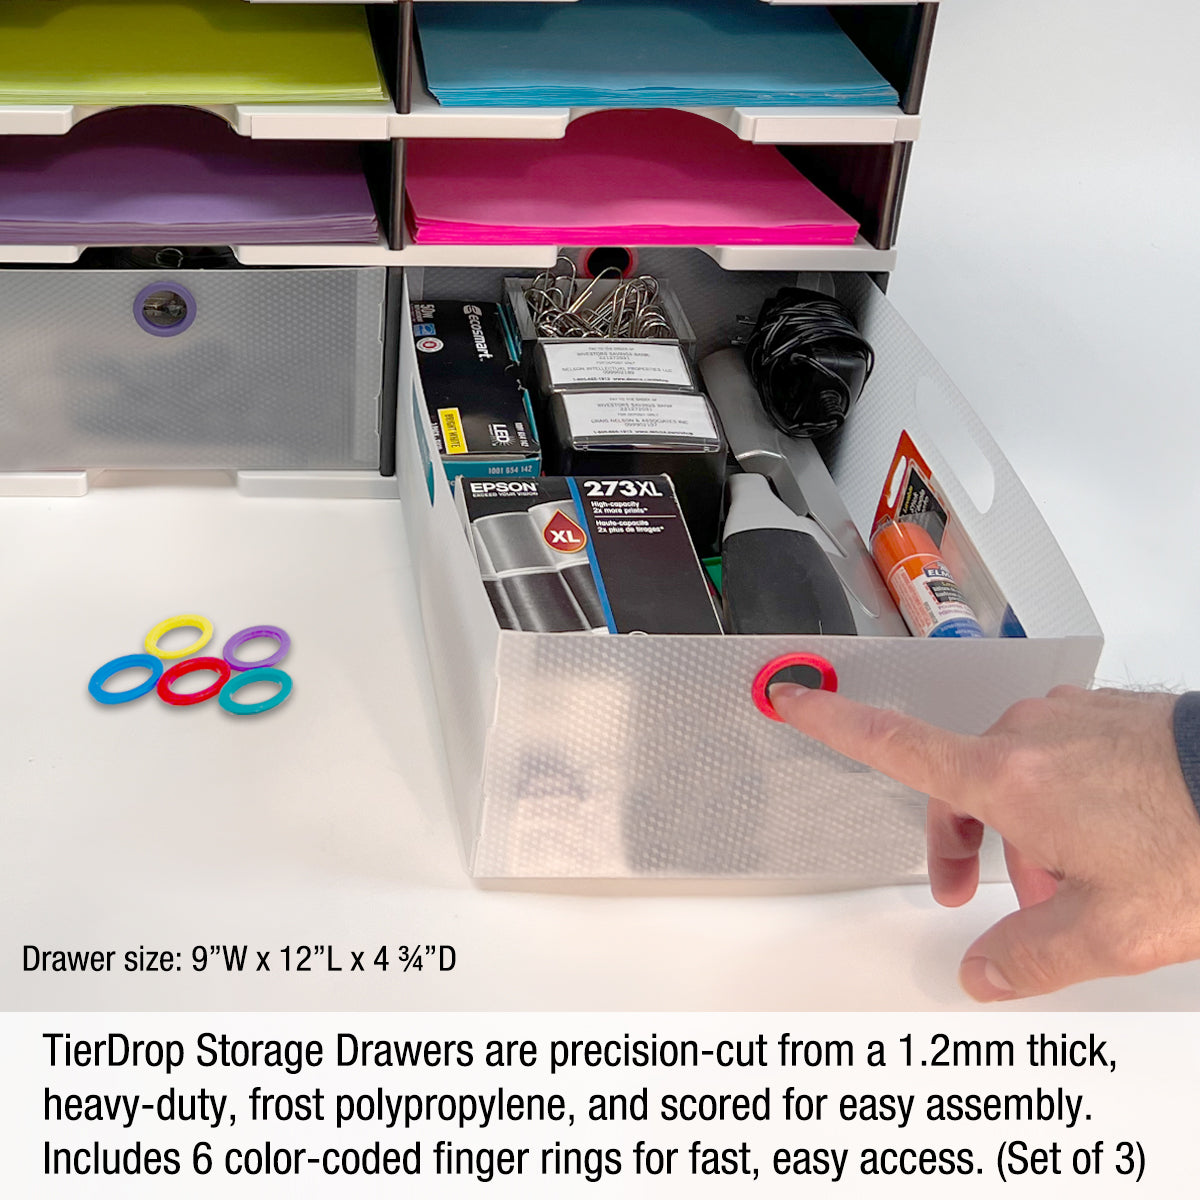 Ultimate Office Desktop Organizer File Sorter Letter Trays and A Hanging File Rack All in One for Fast and Easy Access to All of Your Forms